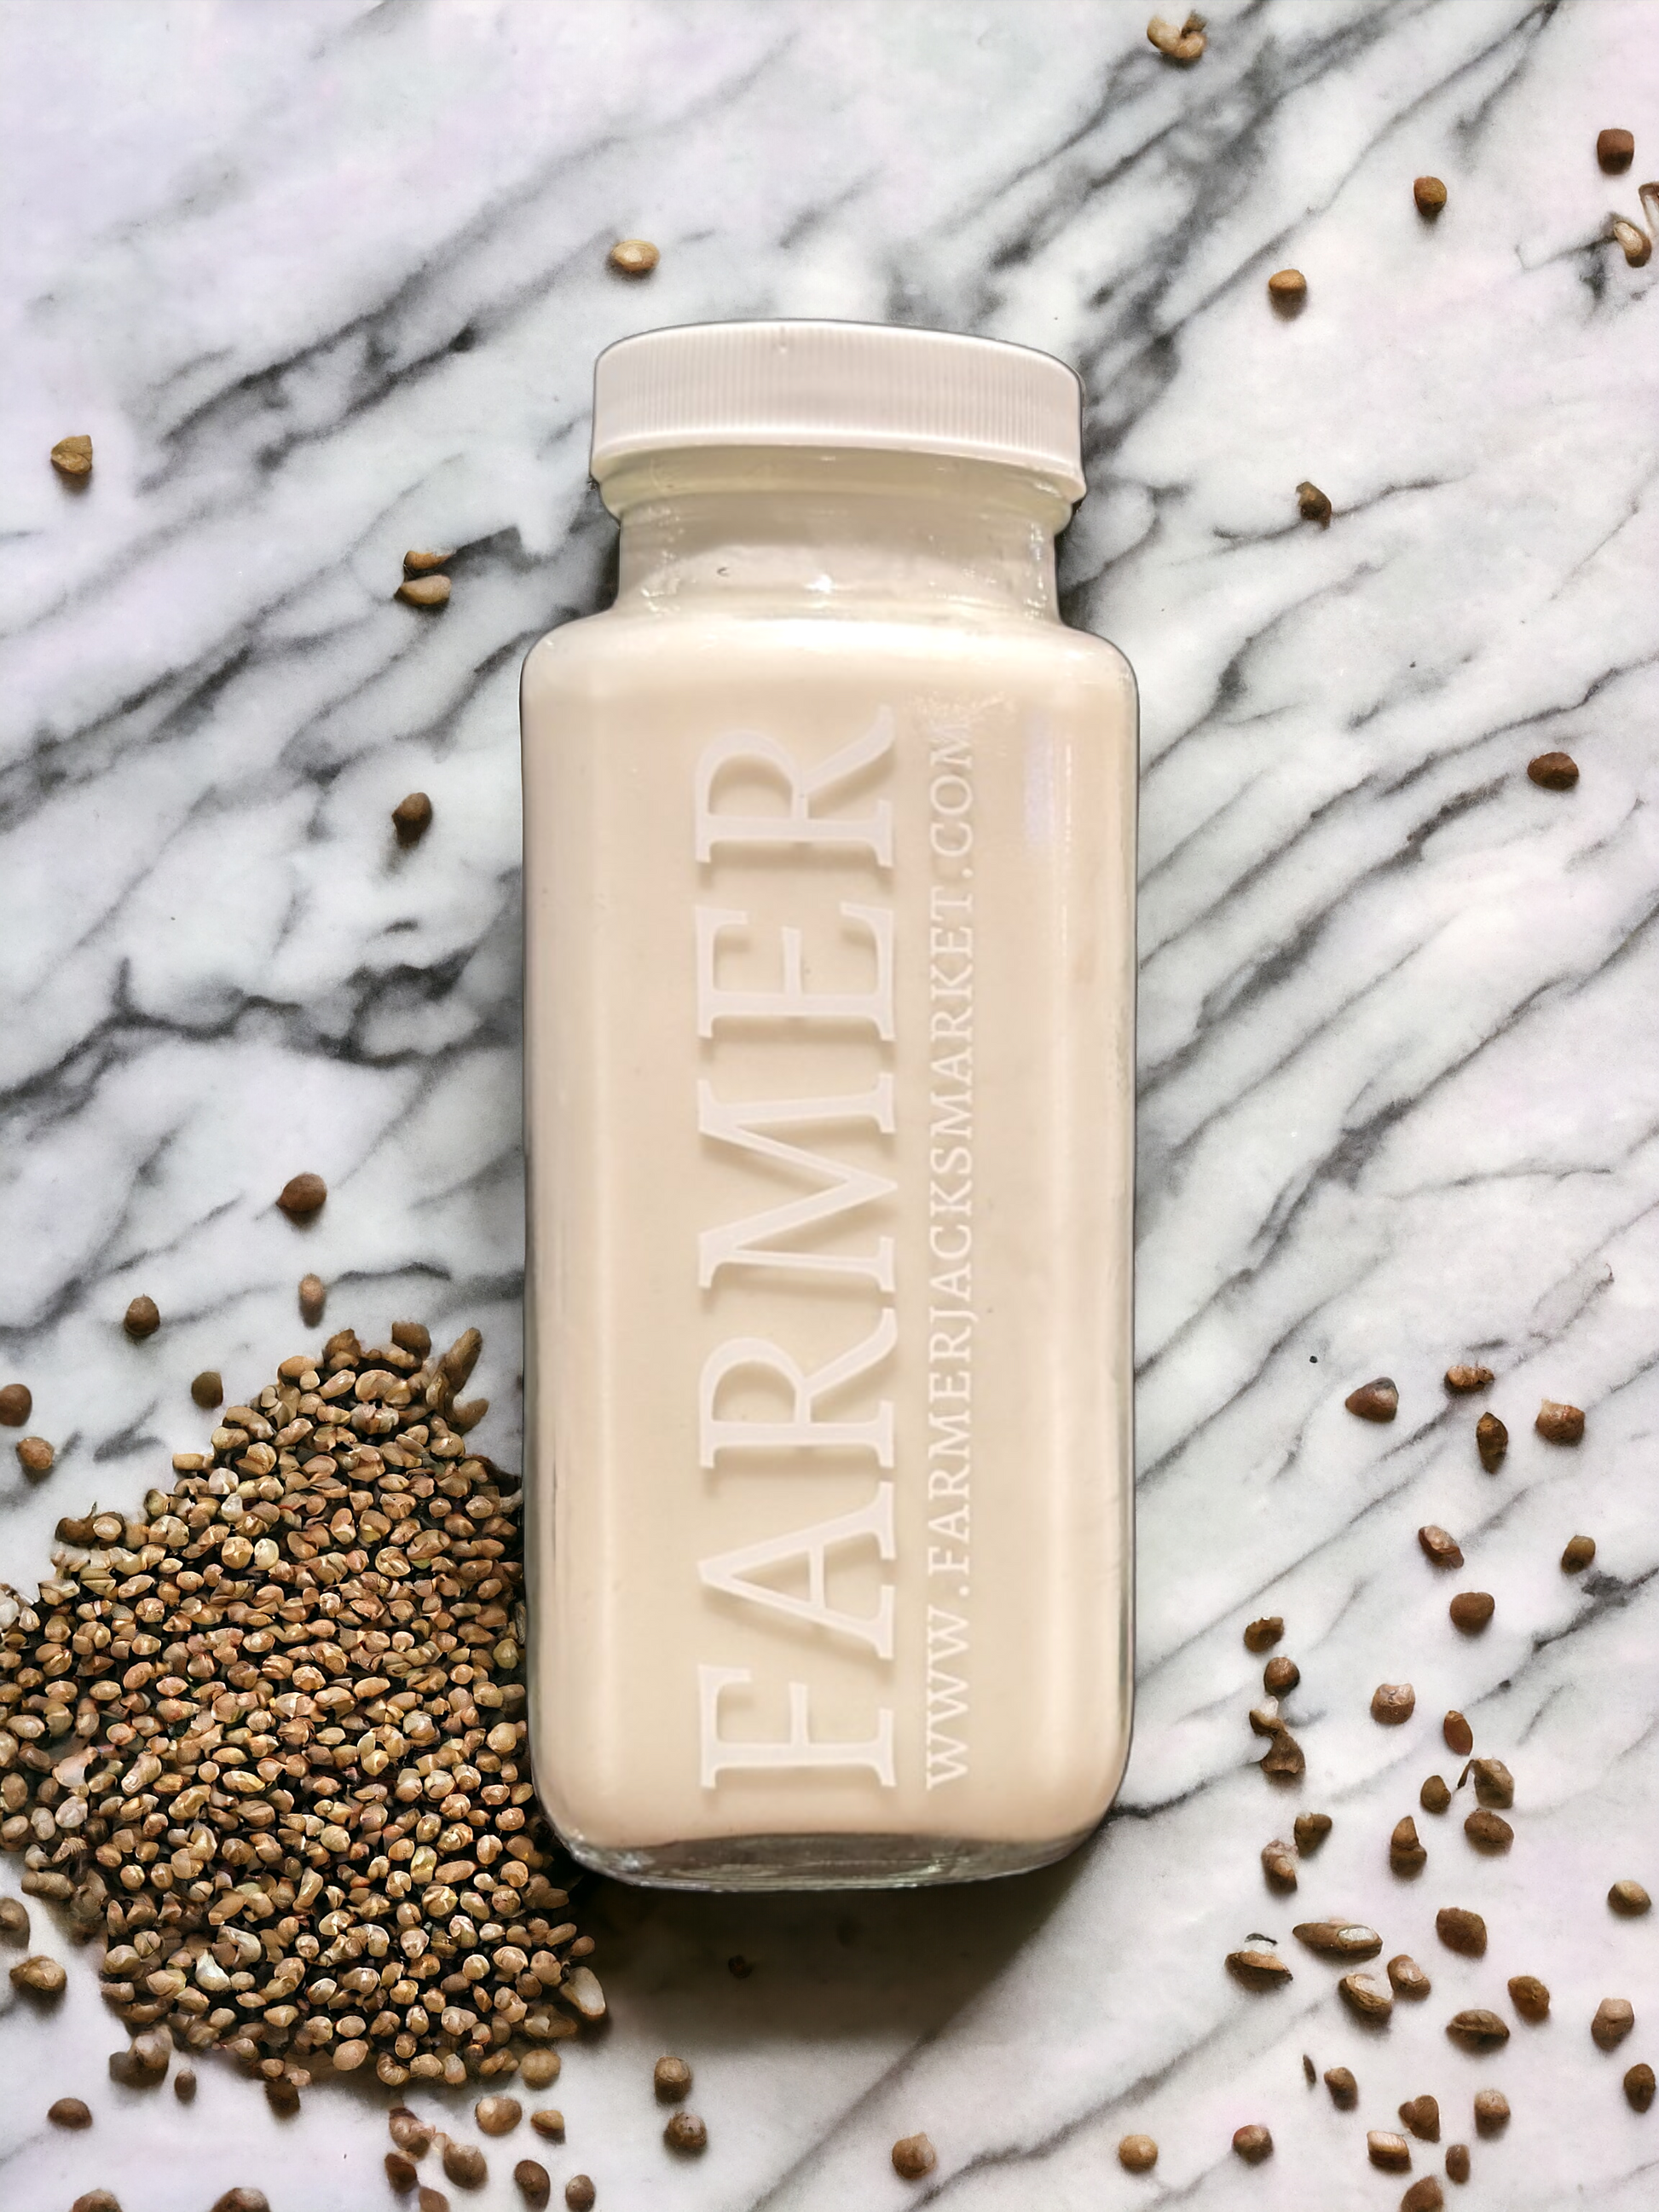 A rectangular glass bottle of white hemp milk against a marble backdrop with hemp seeds scattered around it.